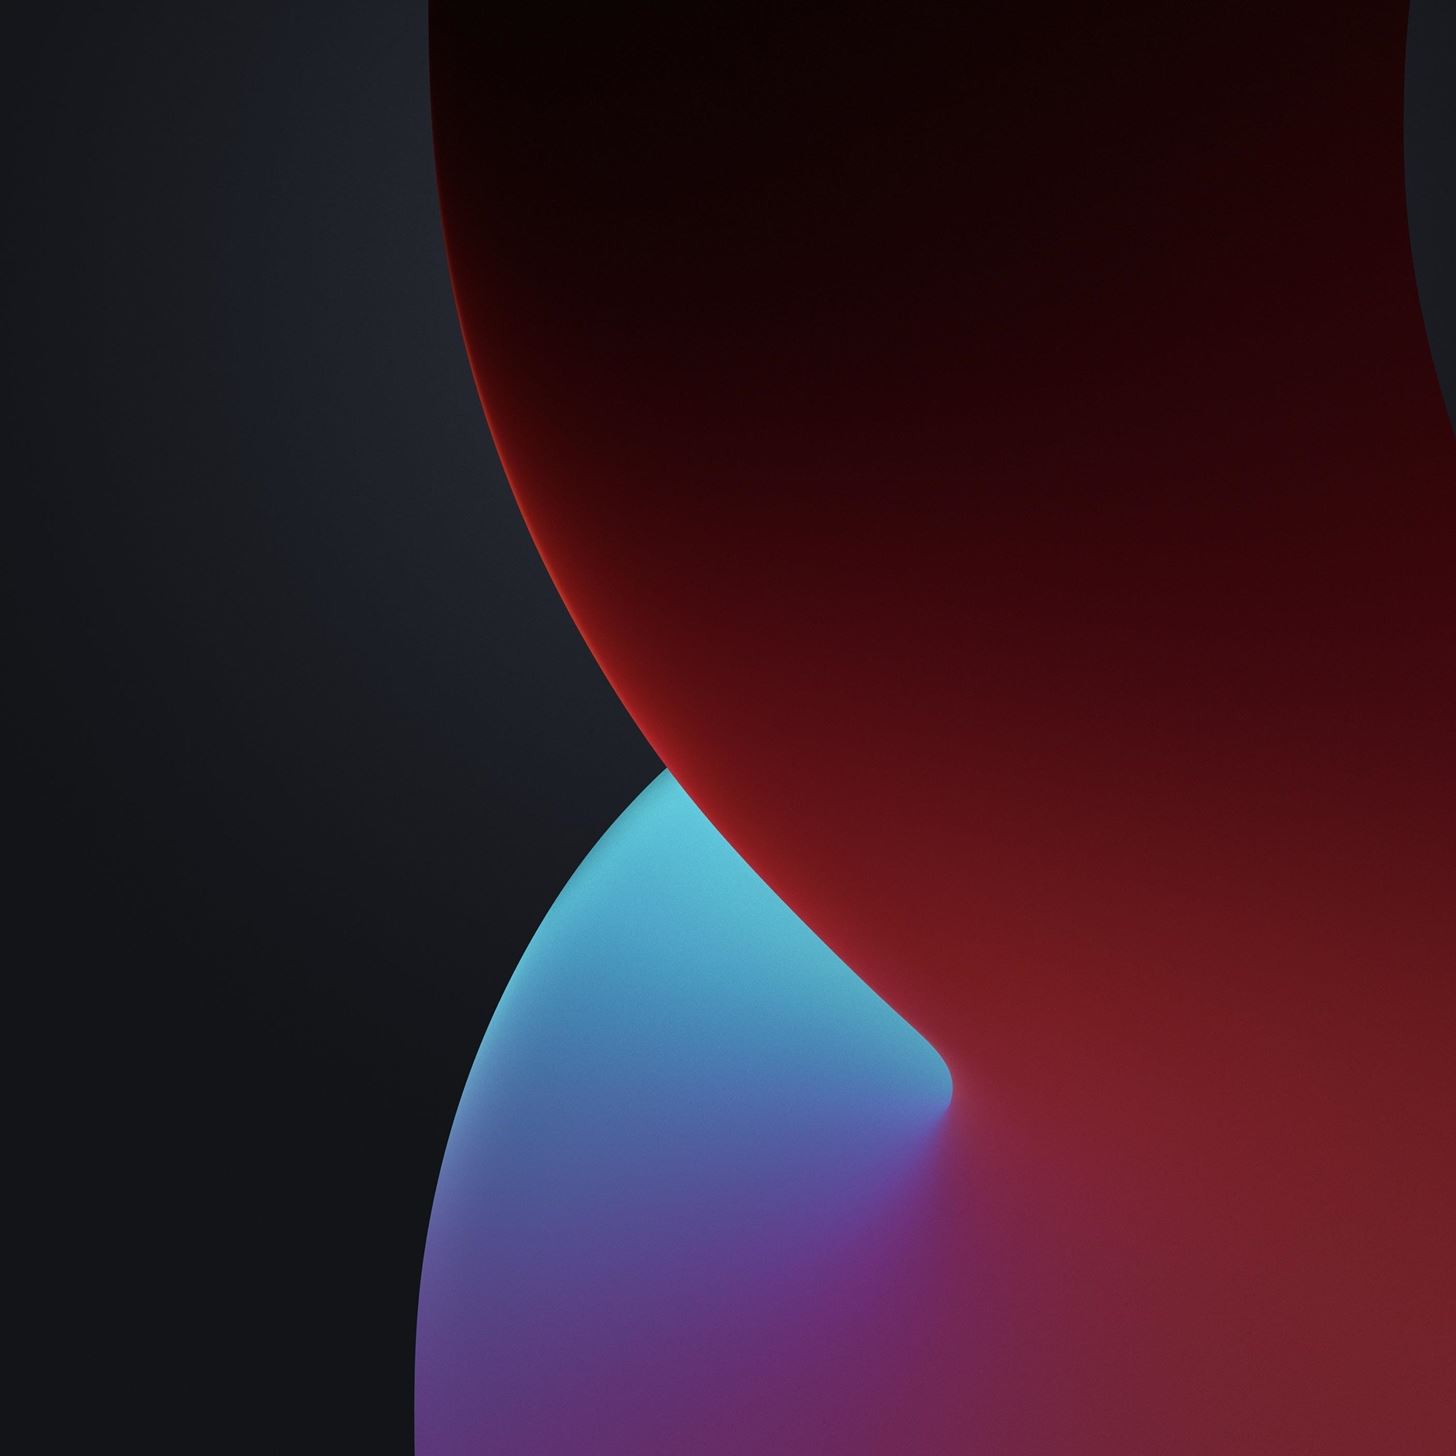 How to Get iOS 14's New Wallpapers on Any iPhone or Android Phone